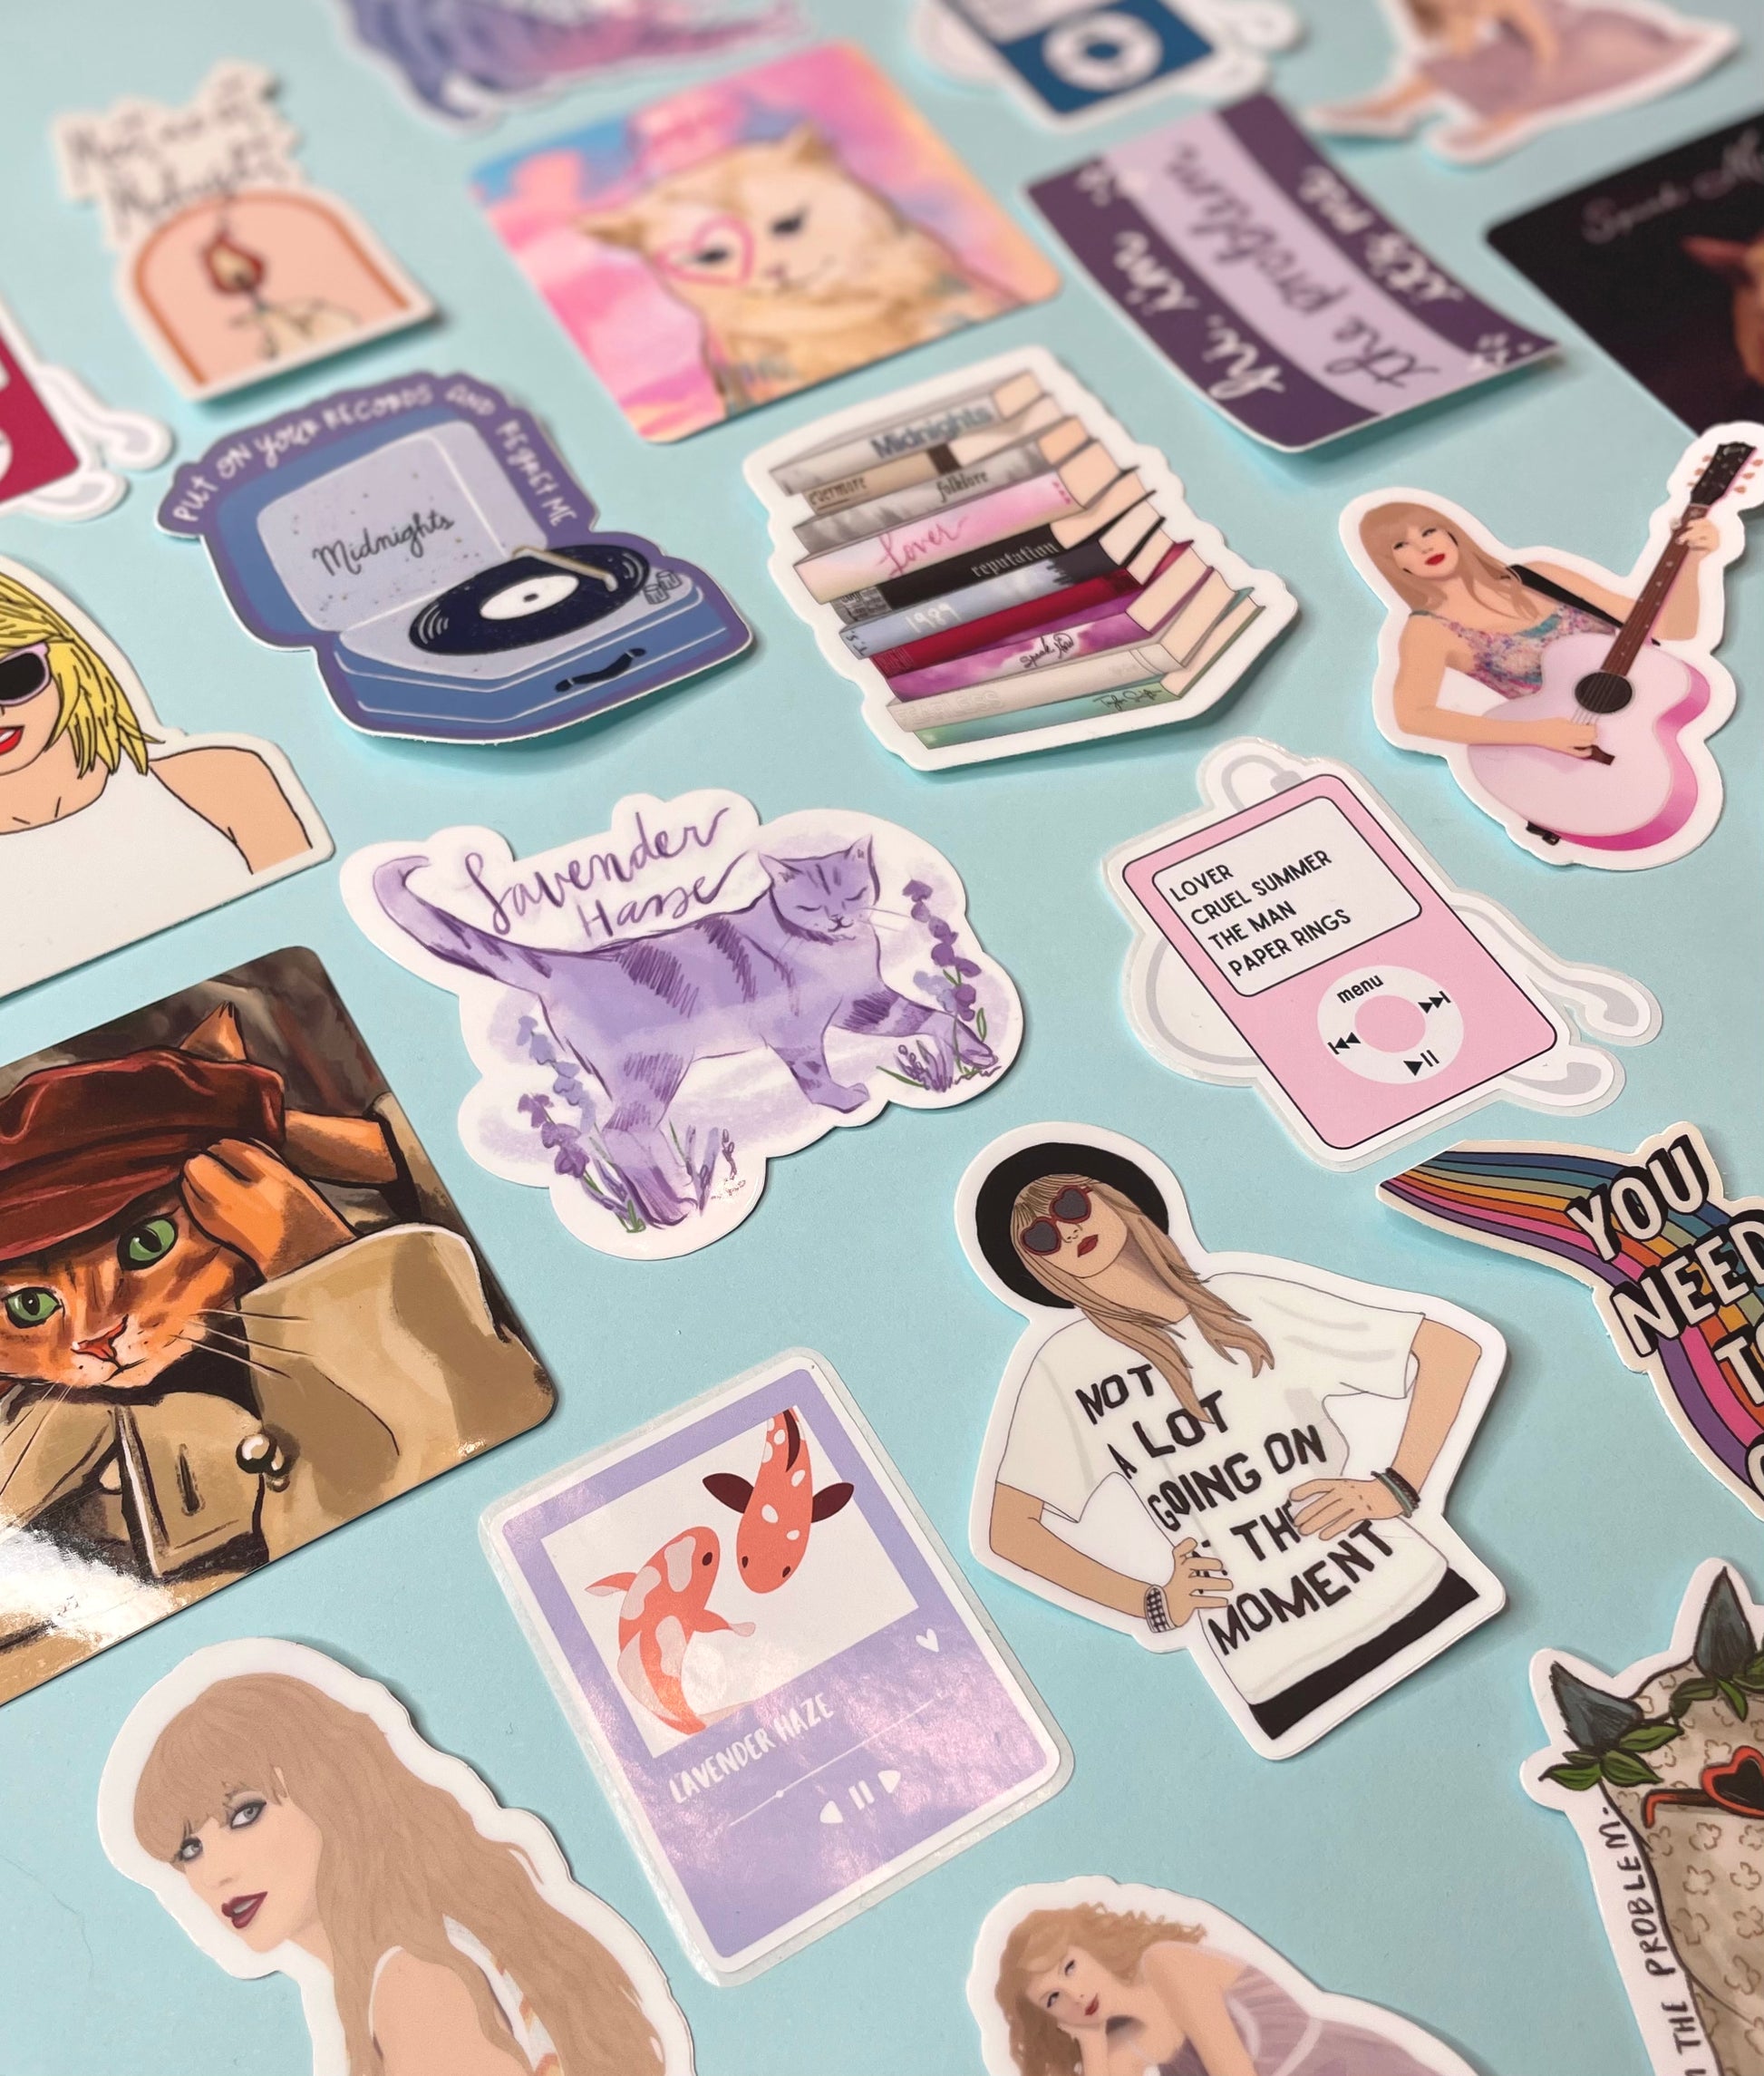 Taylor Swift - Sticker - Not A Lot Going On At The Moment. Eras